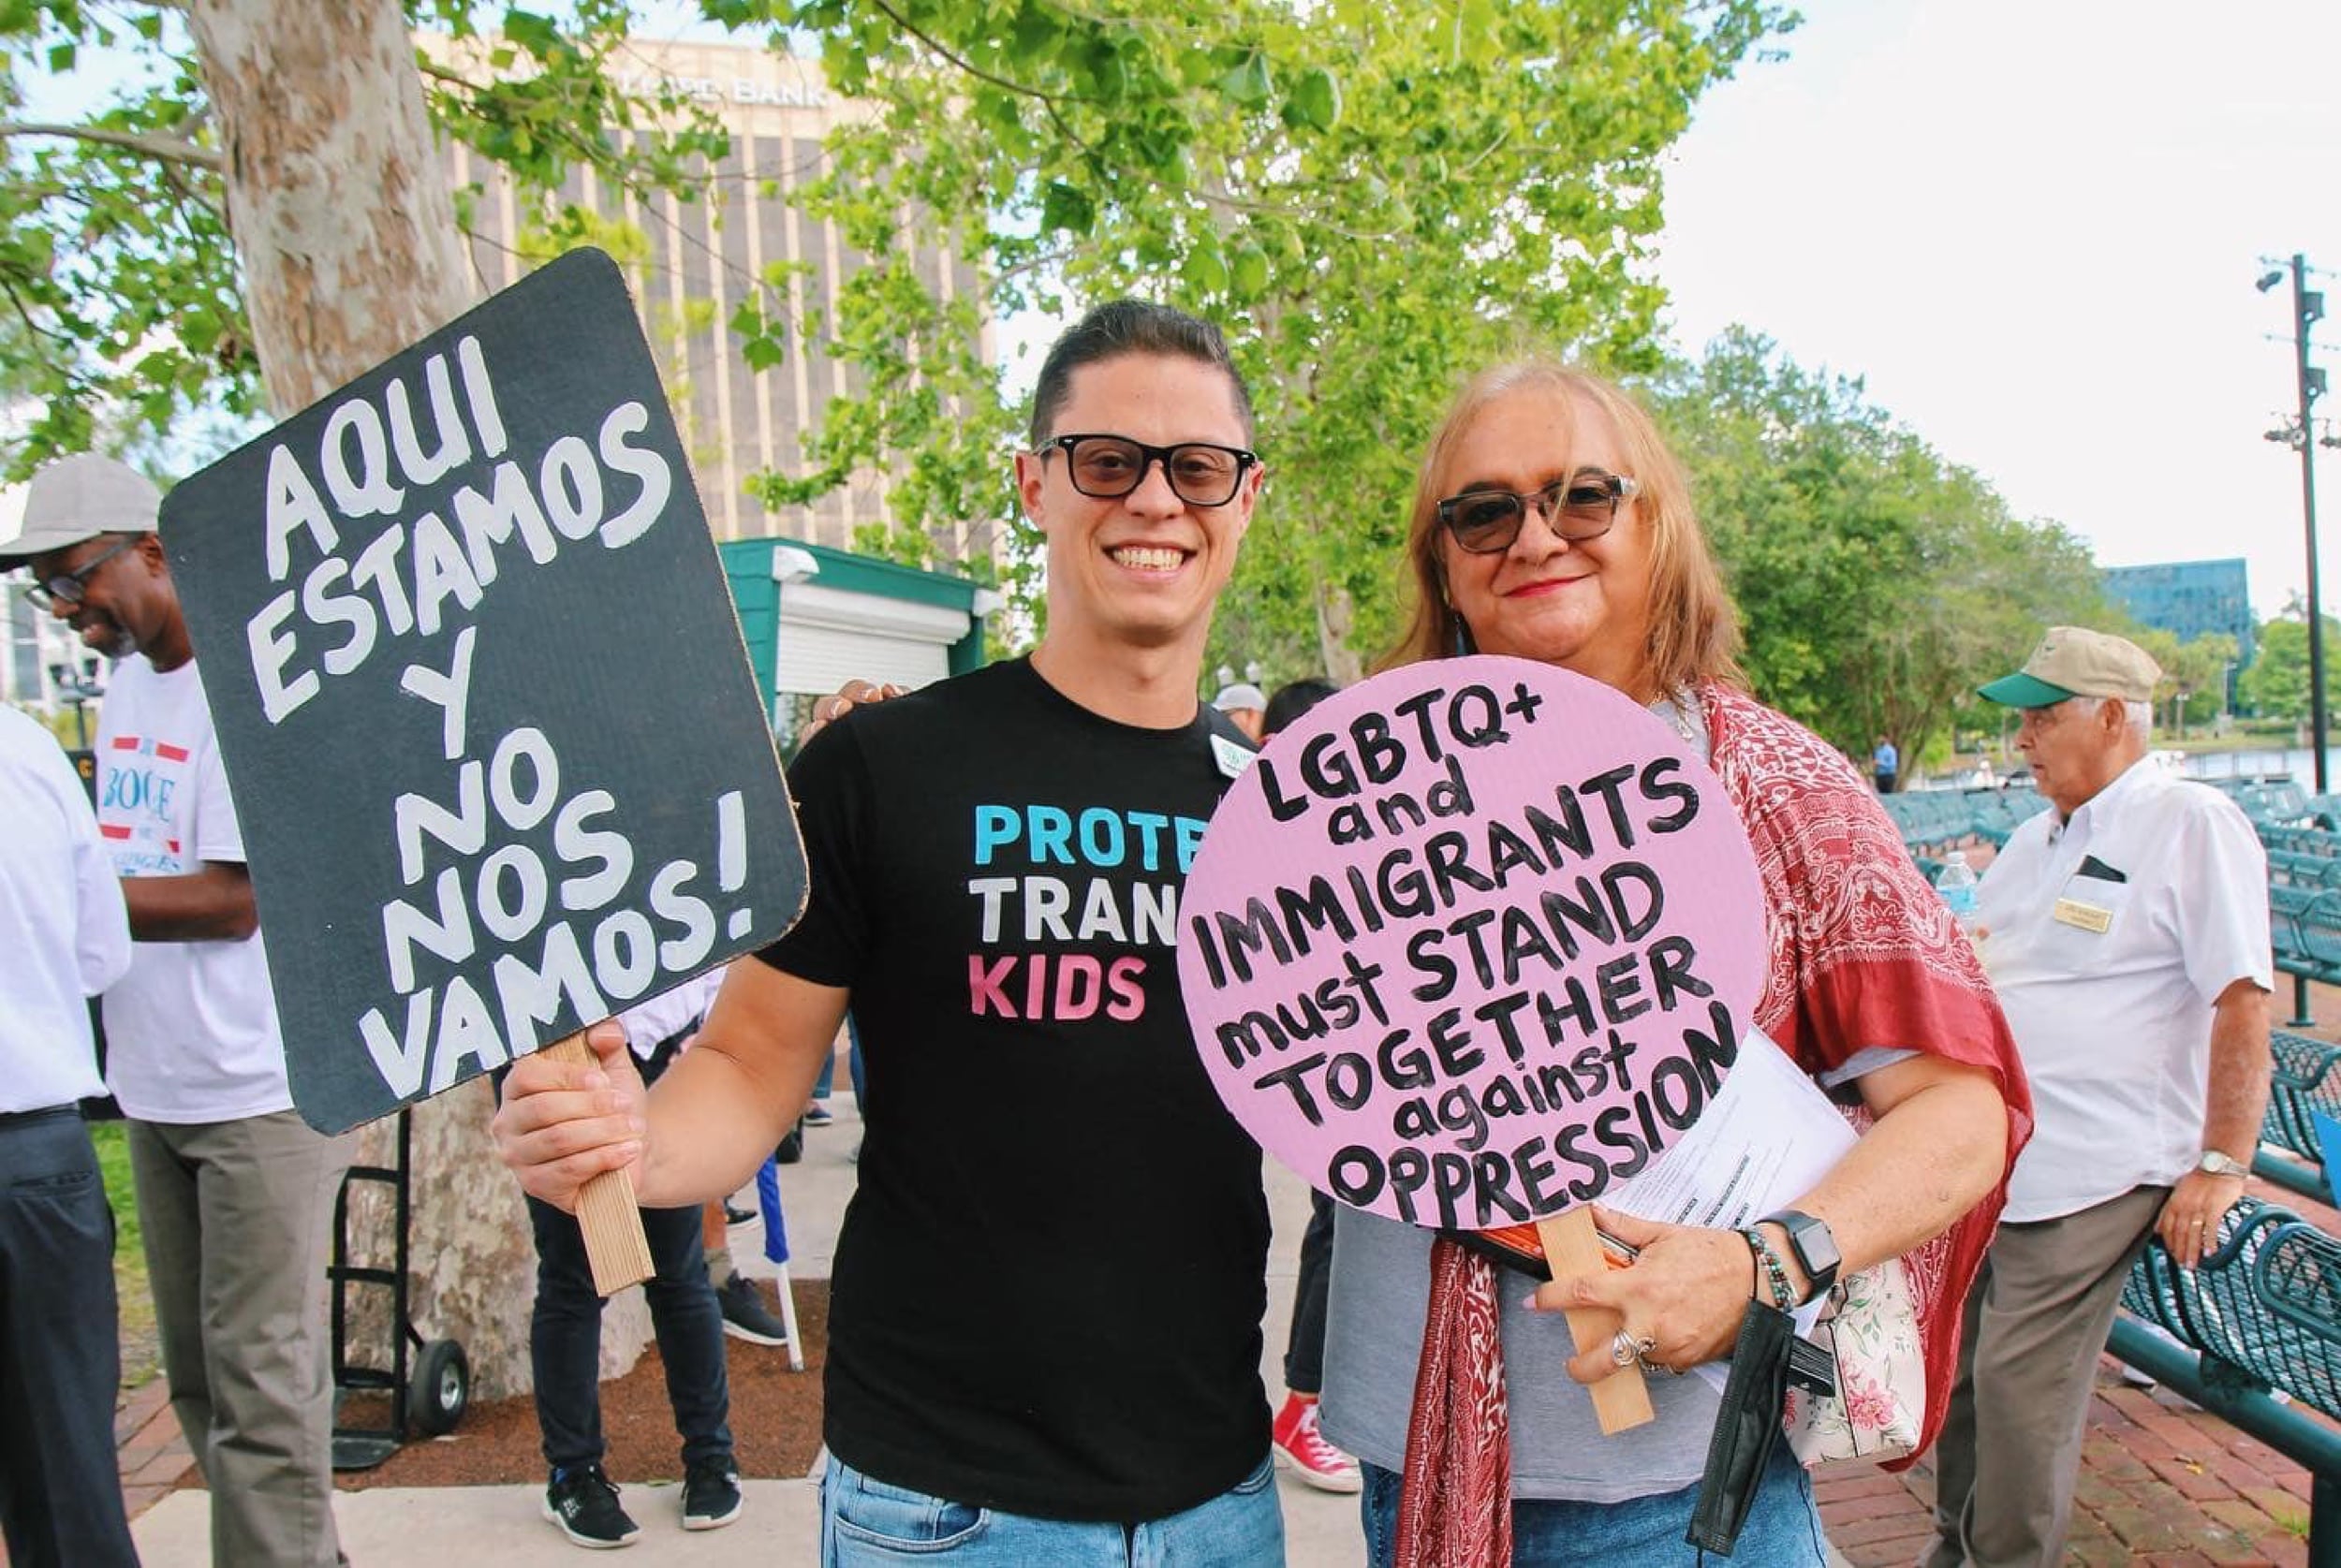 Two protesters holding signs that read 'Aqui estamos y no nos vamos!' and 'LGBTQ+ and immigrants must stand together against oppression.' 